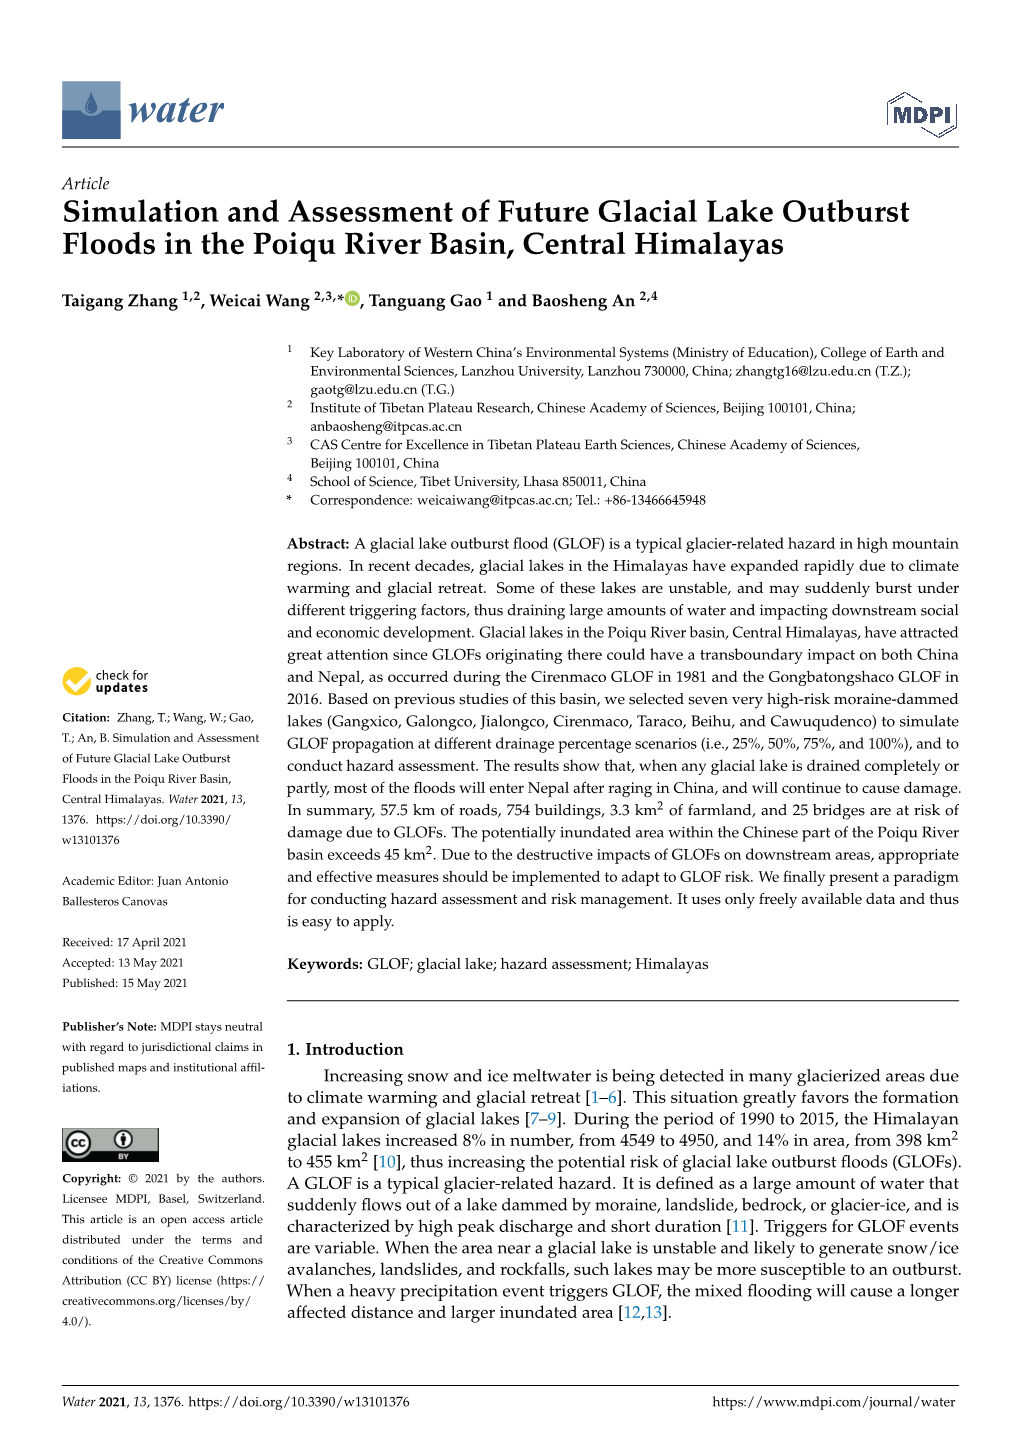 Simulation and Assessment of Future Glacial Lake Outburst Floods in the Poiqu River Basin, Central Himalayas